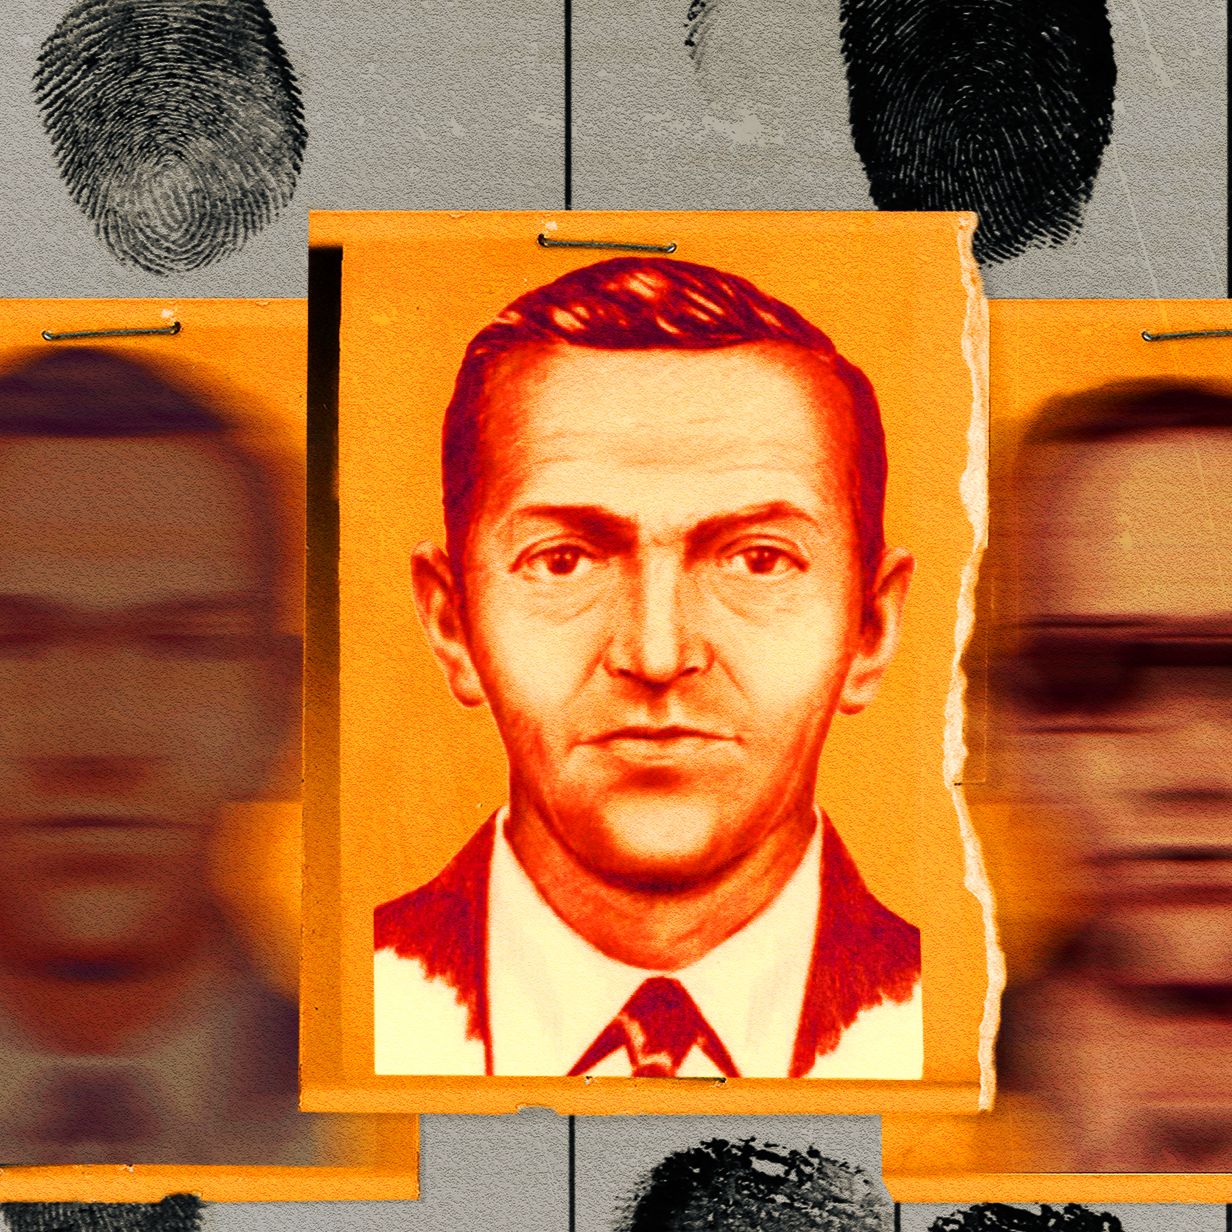 A Startling Confession May Have Just Revealed D.B. Cooper's Real Identity After 52 Years